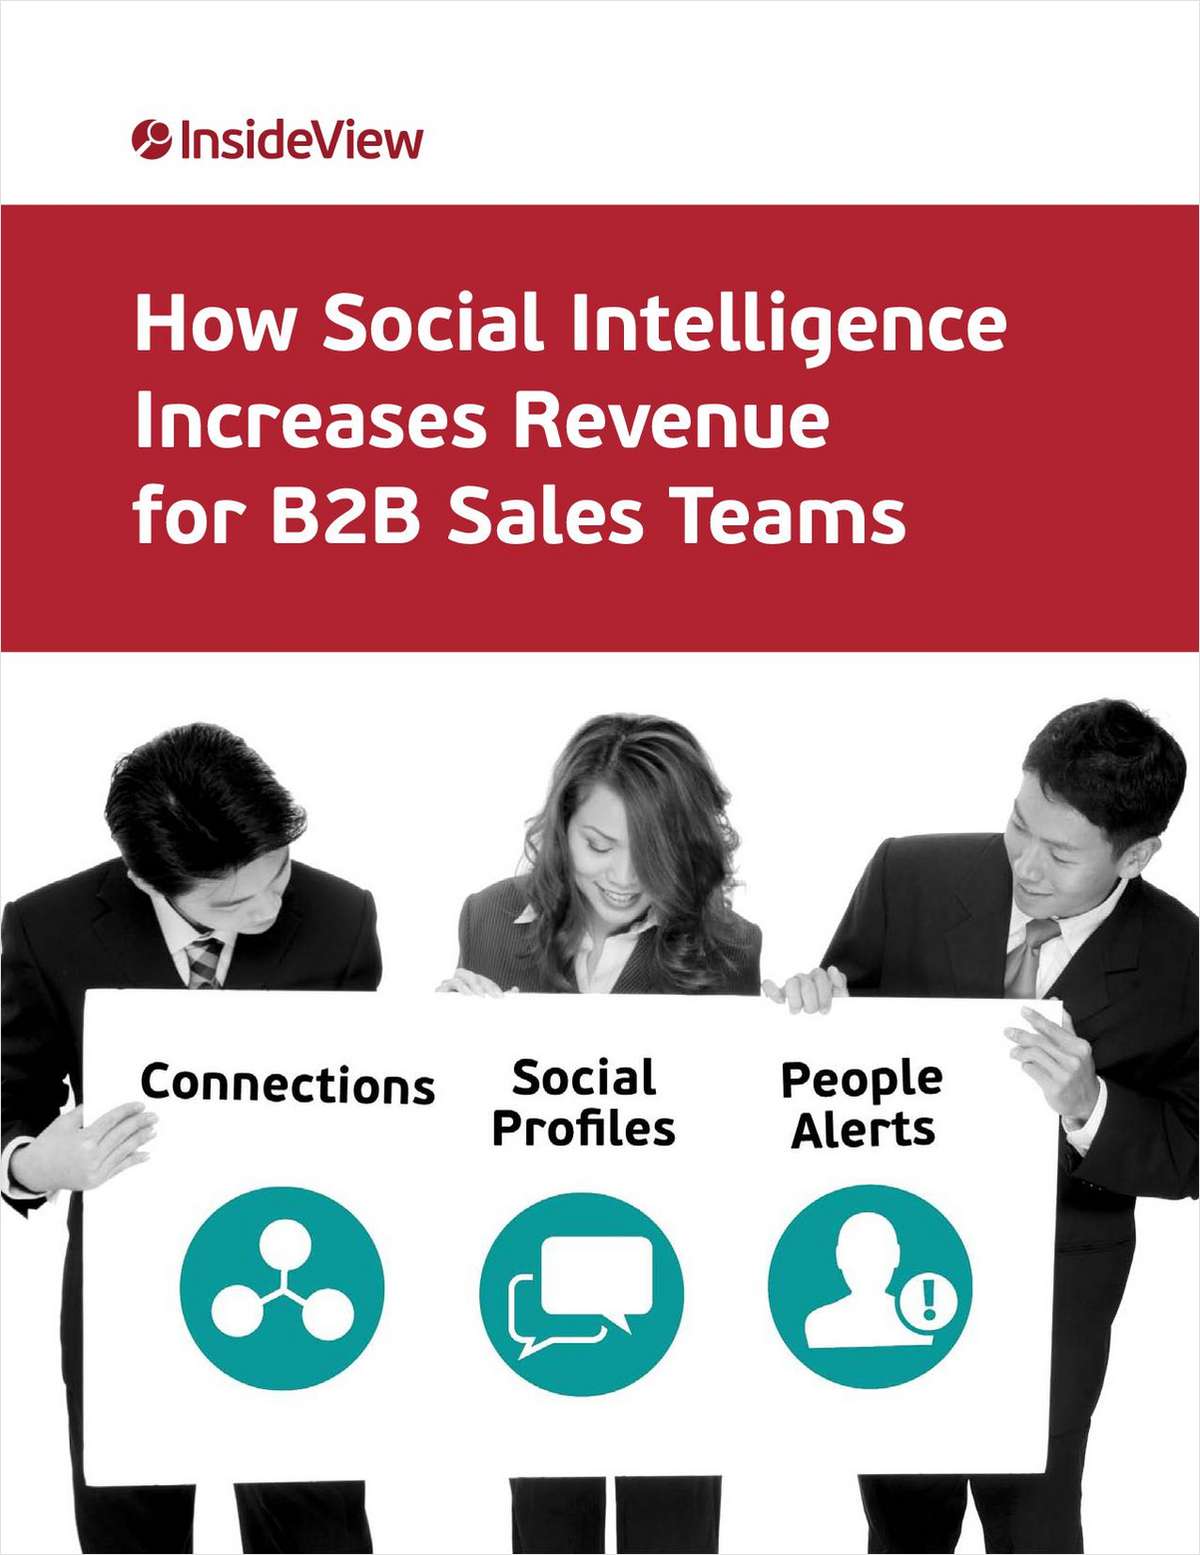 How Social Intelligence Increases Revenue for B2B Sales Teams